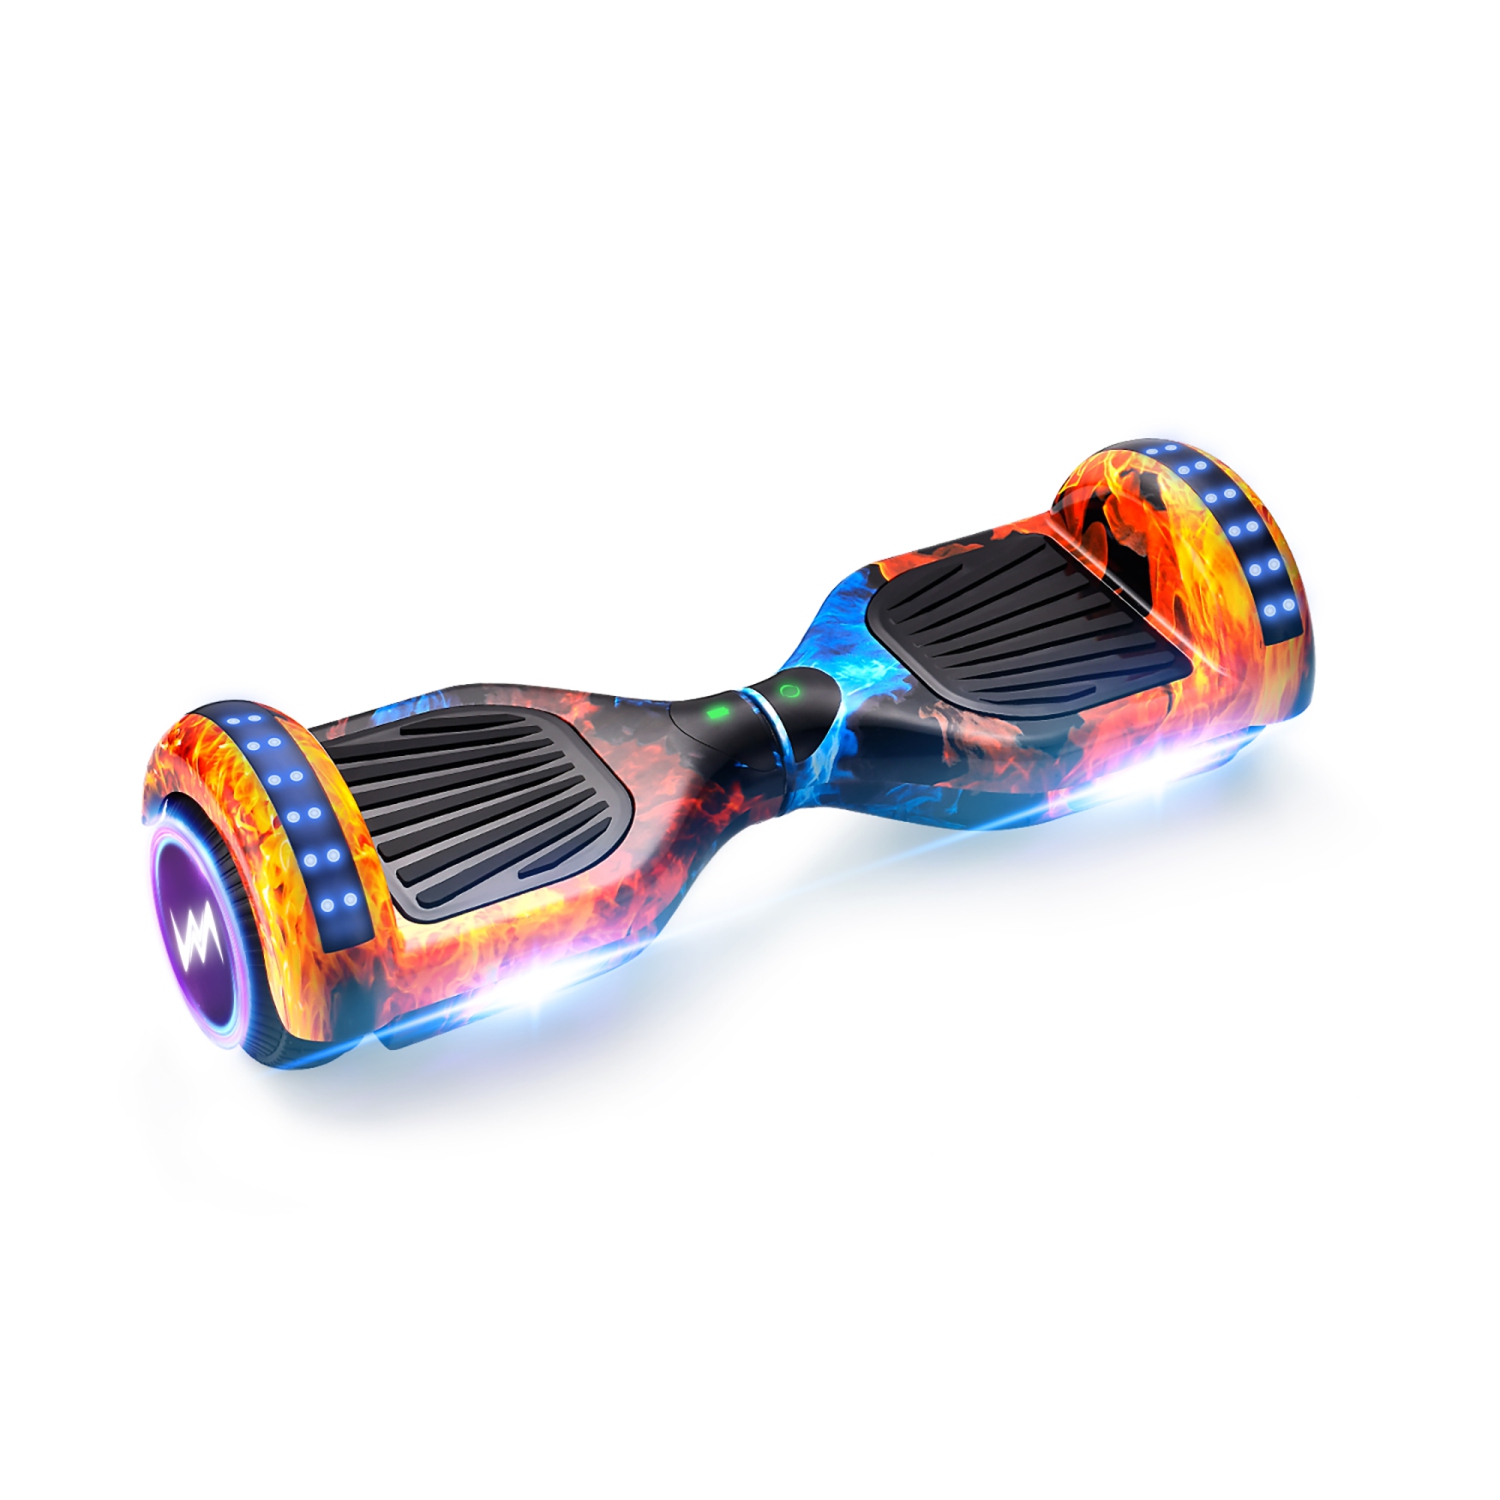 WEELMOTION Galaxy Flame Hoverboard with Music Speaker, LED Front Lights,Strap Lights & Shining Wheels All Terrain 6.5" UL 2272 Certified Hoverboard with free hover board bag